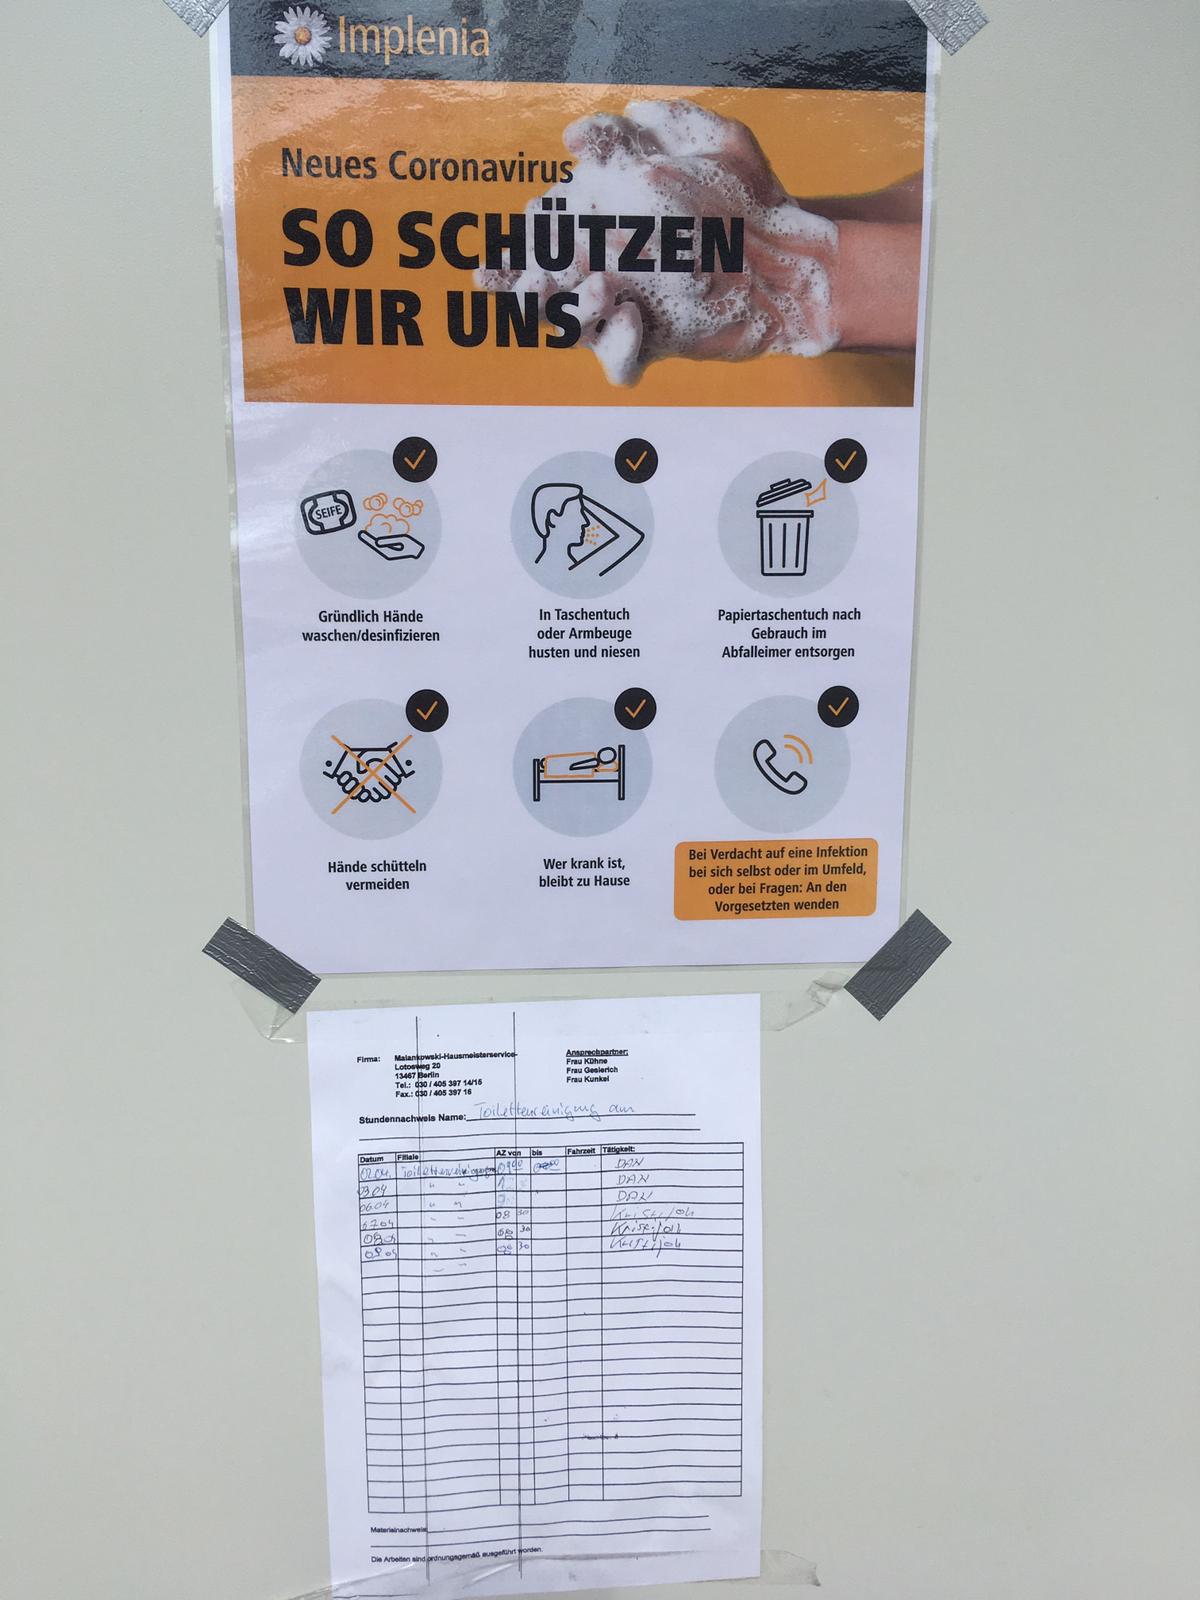 Information and hygiene: In addition to the information posters that were hung up everywhere, we have also increased the cleaning intervals of the sanitary facilities.